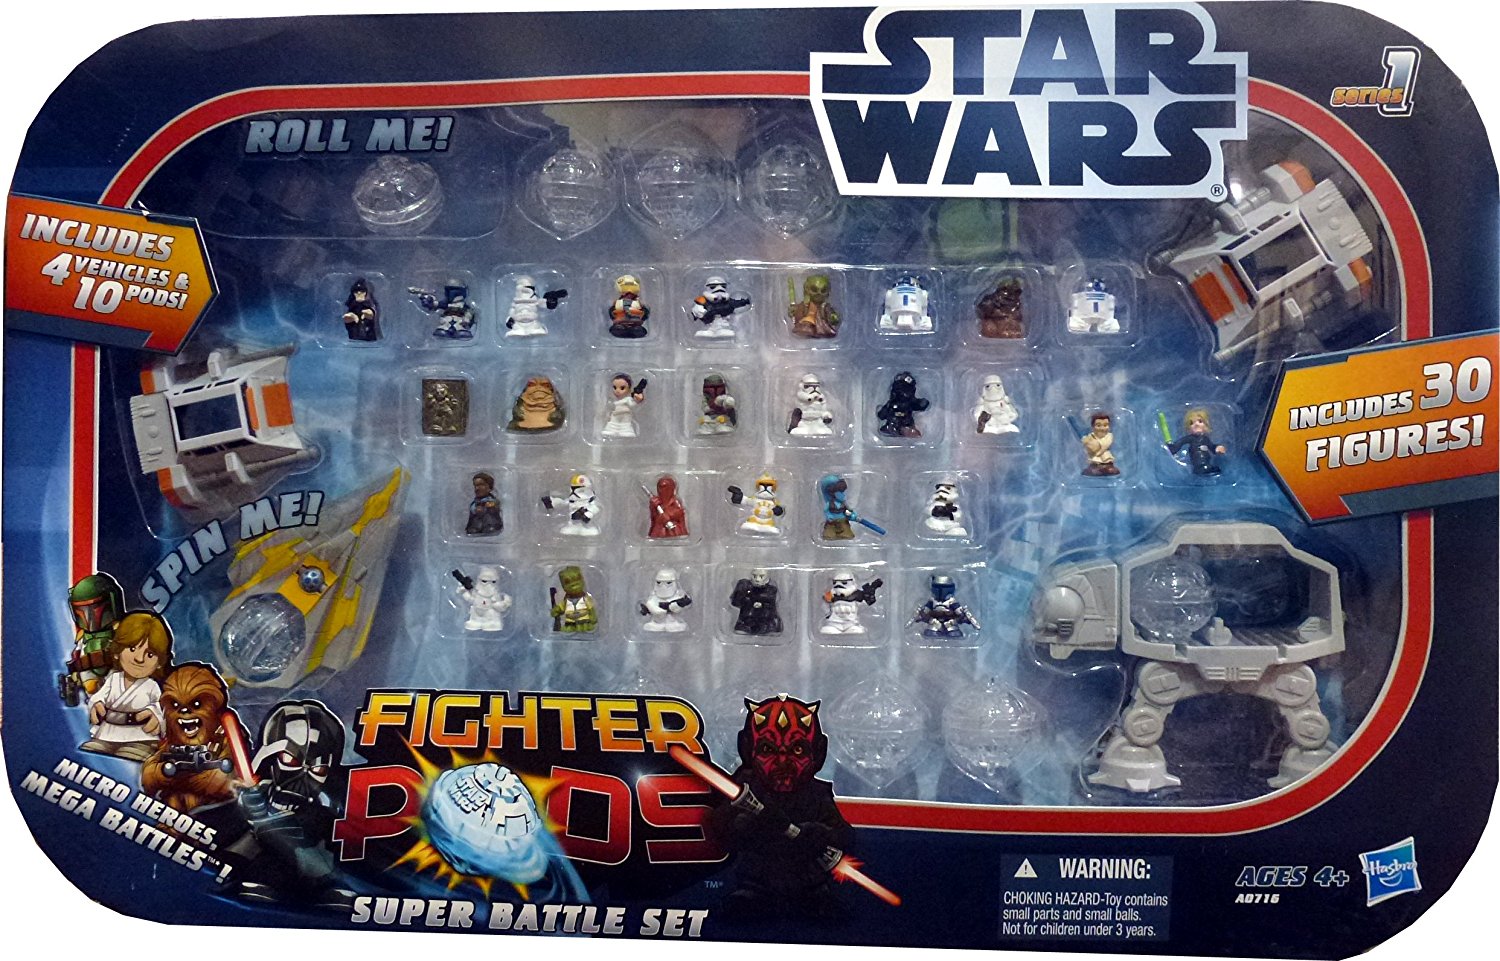 Star Wars Fighter Pods Mini Figures & Sets Toy Hasbro 